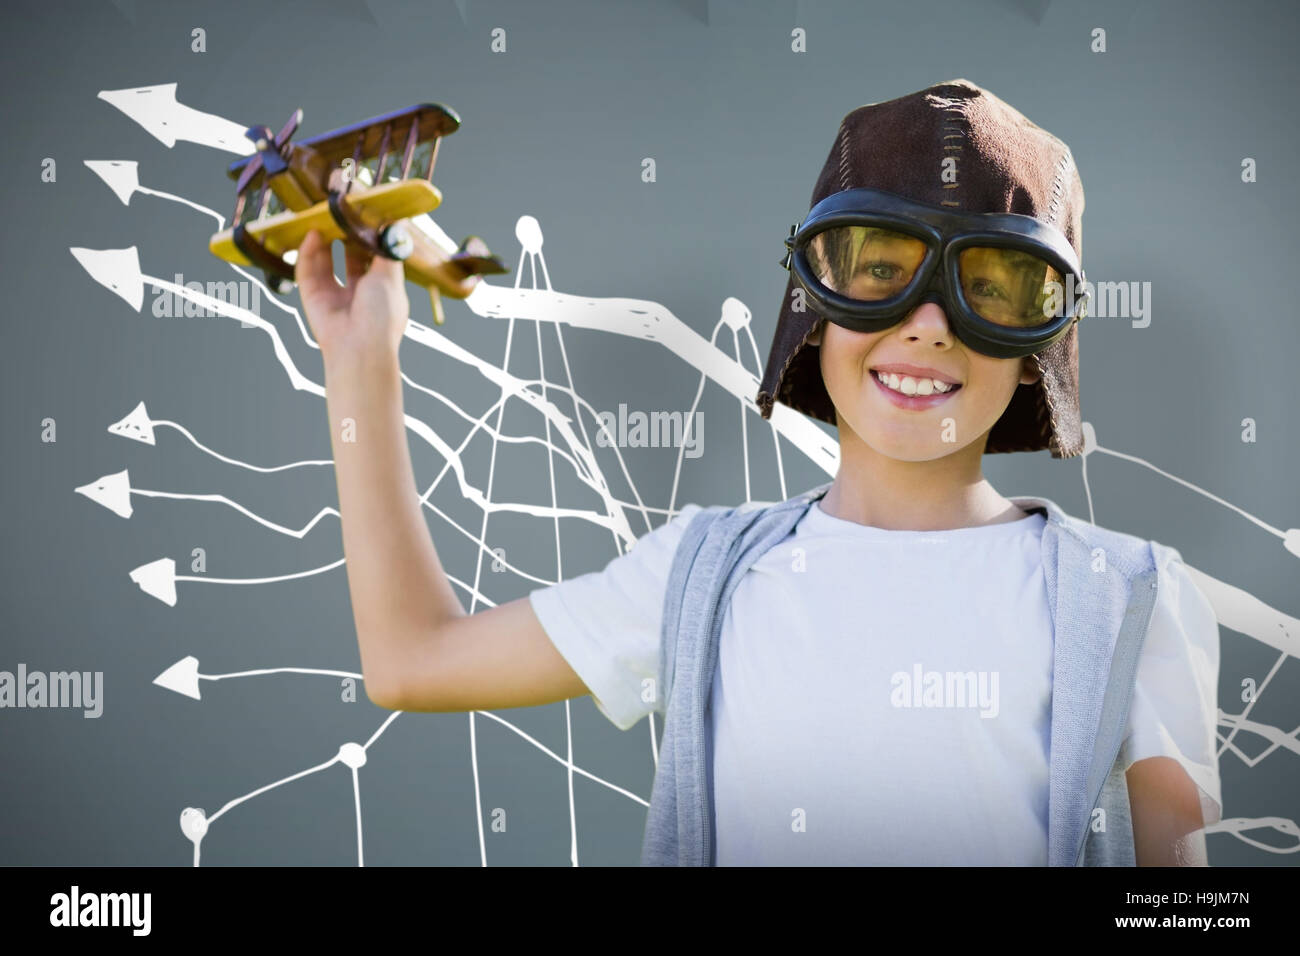 Composite image of portrait of boy wearing flying goggles with toy Stock Photo